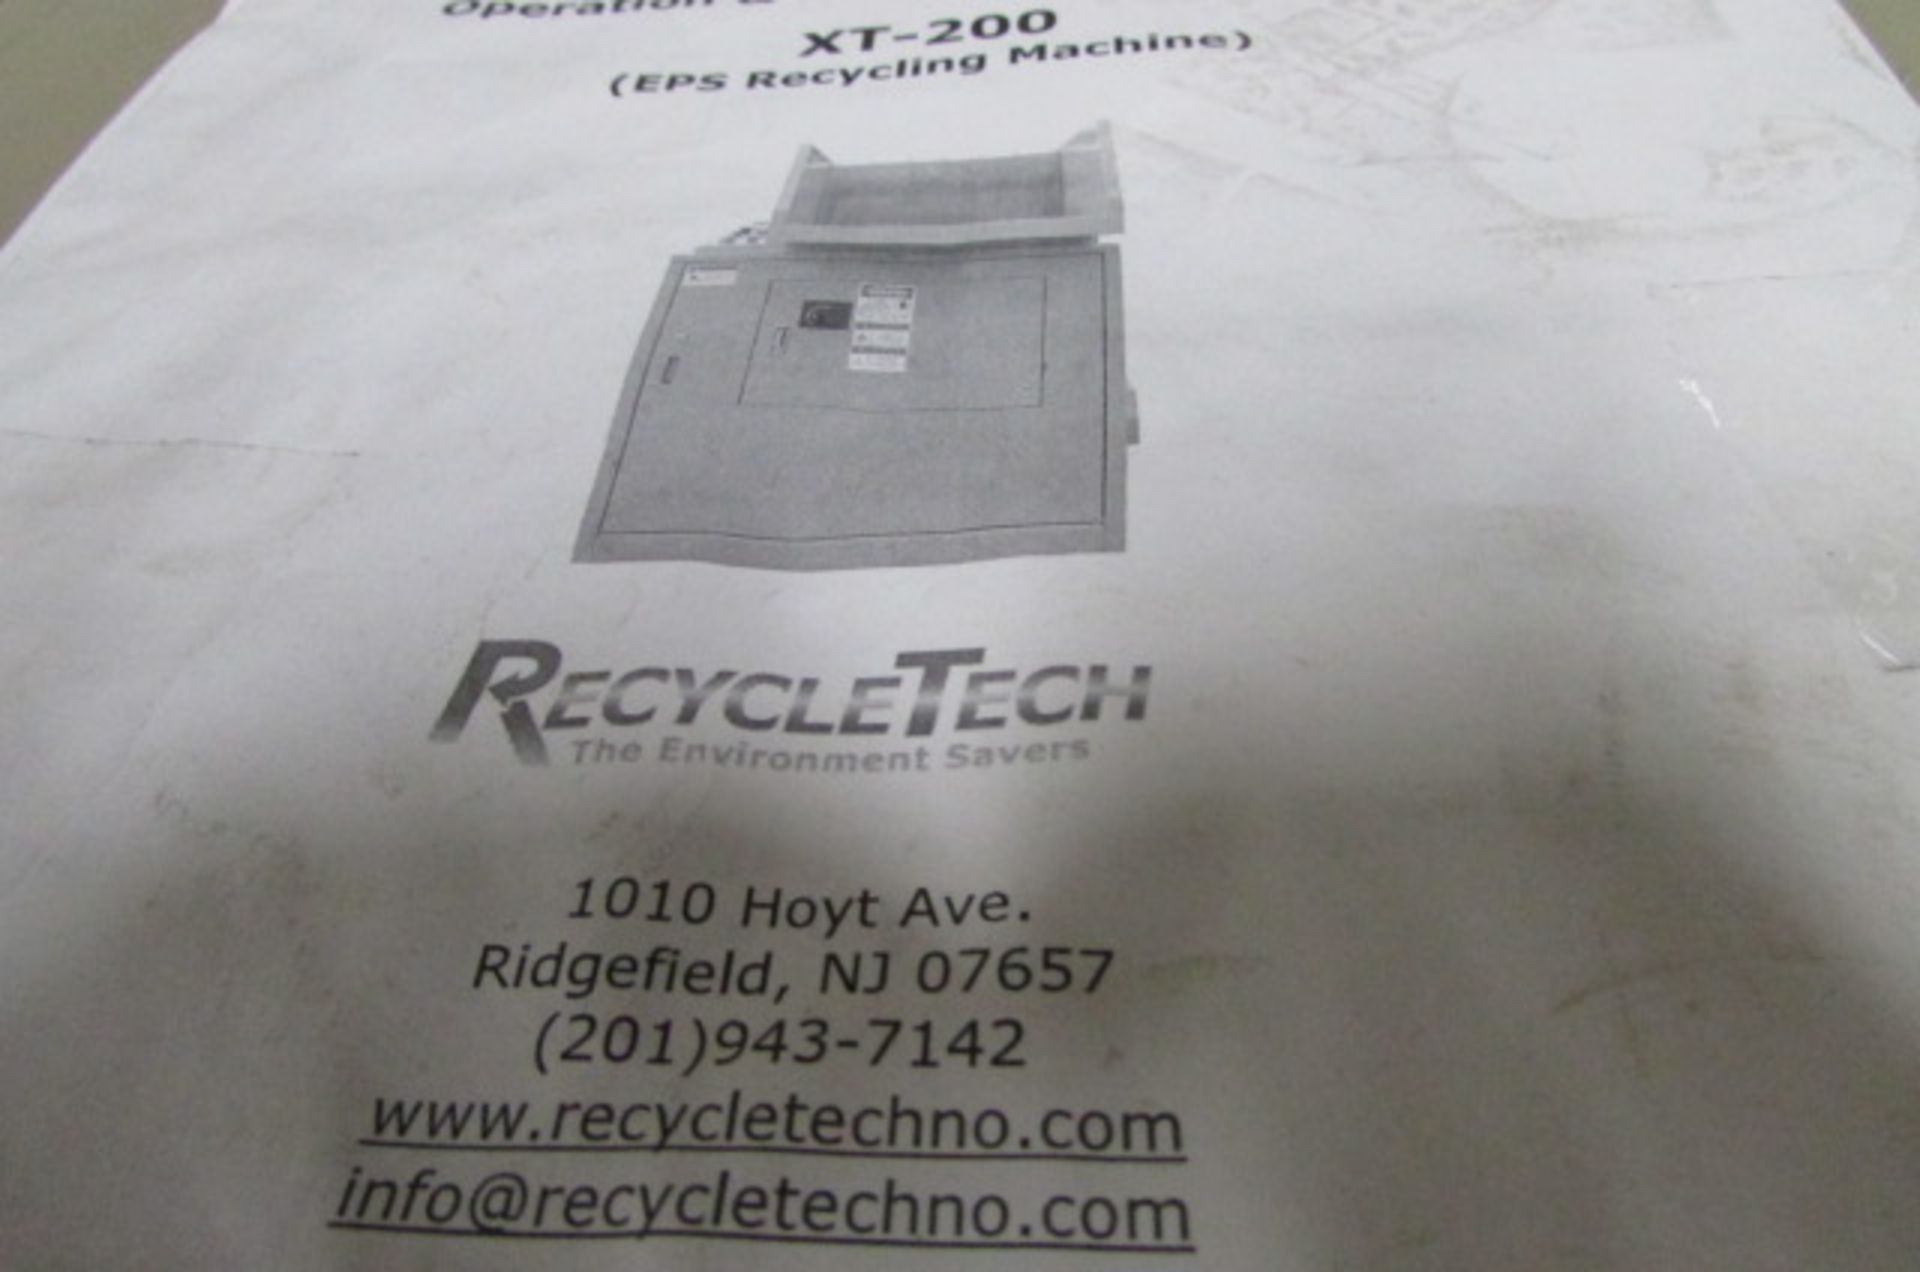 EPS RECYCLING MACHINE MODEL XT-200 - Image 2 of 5